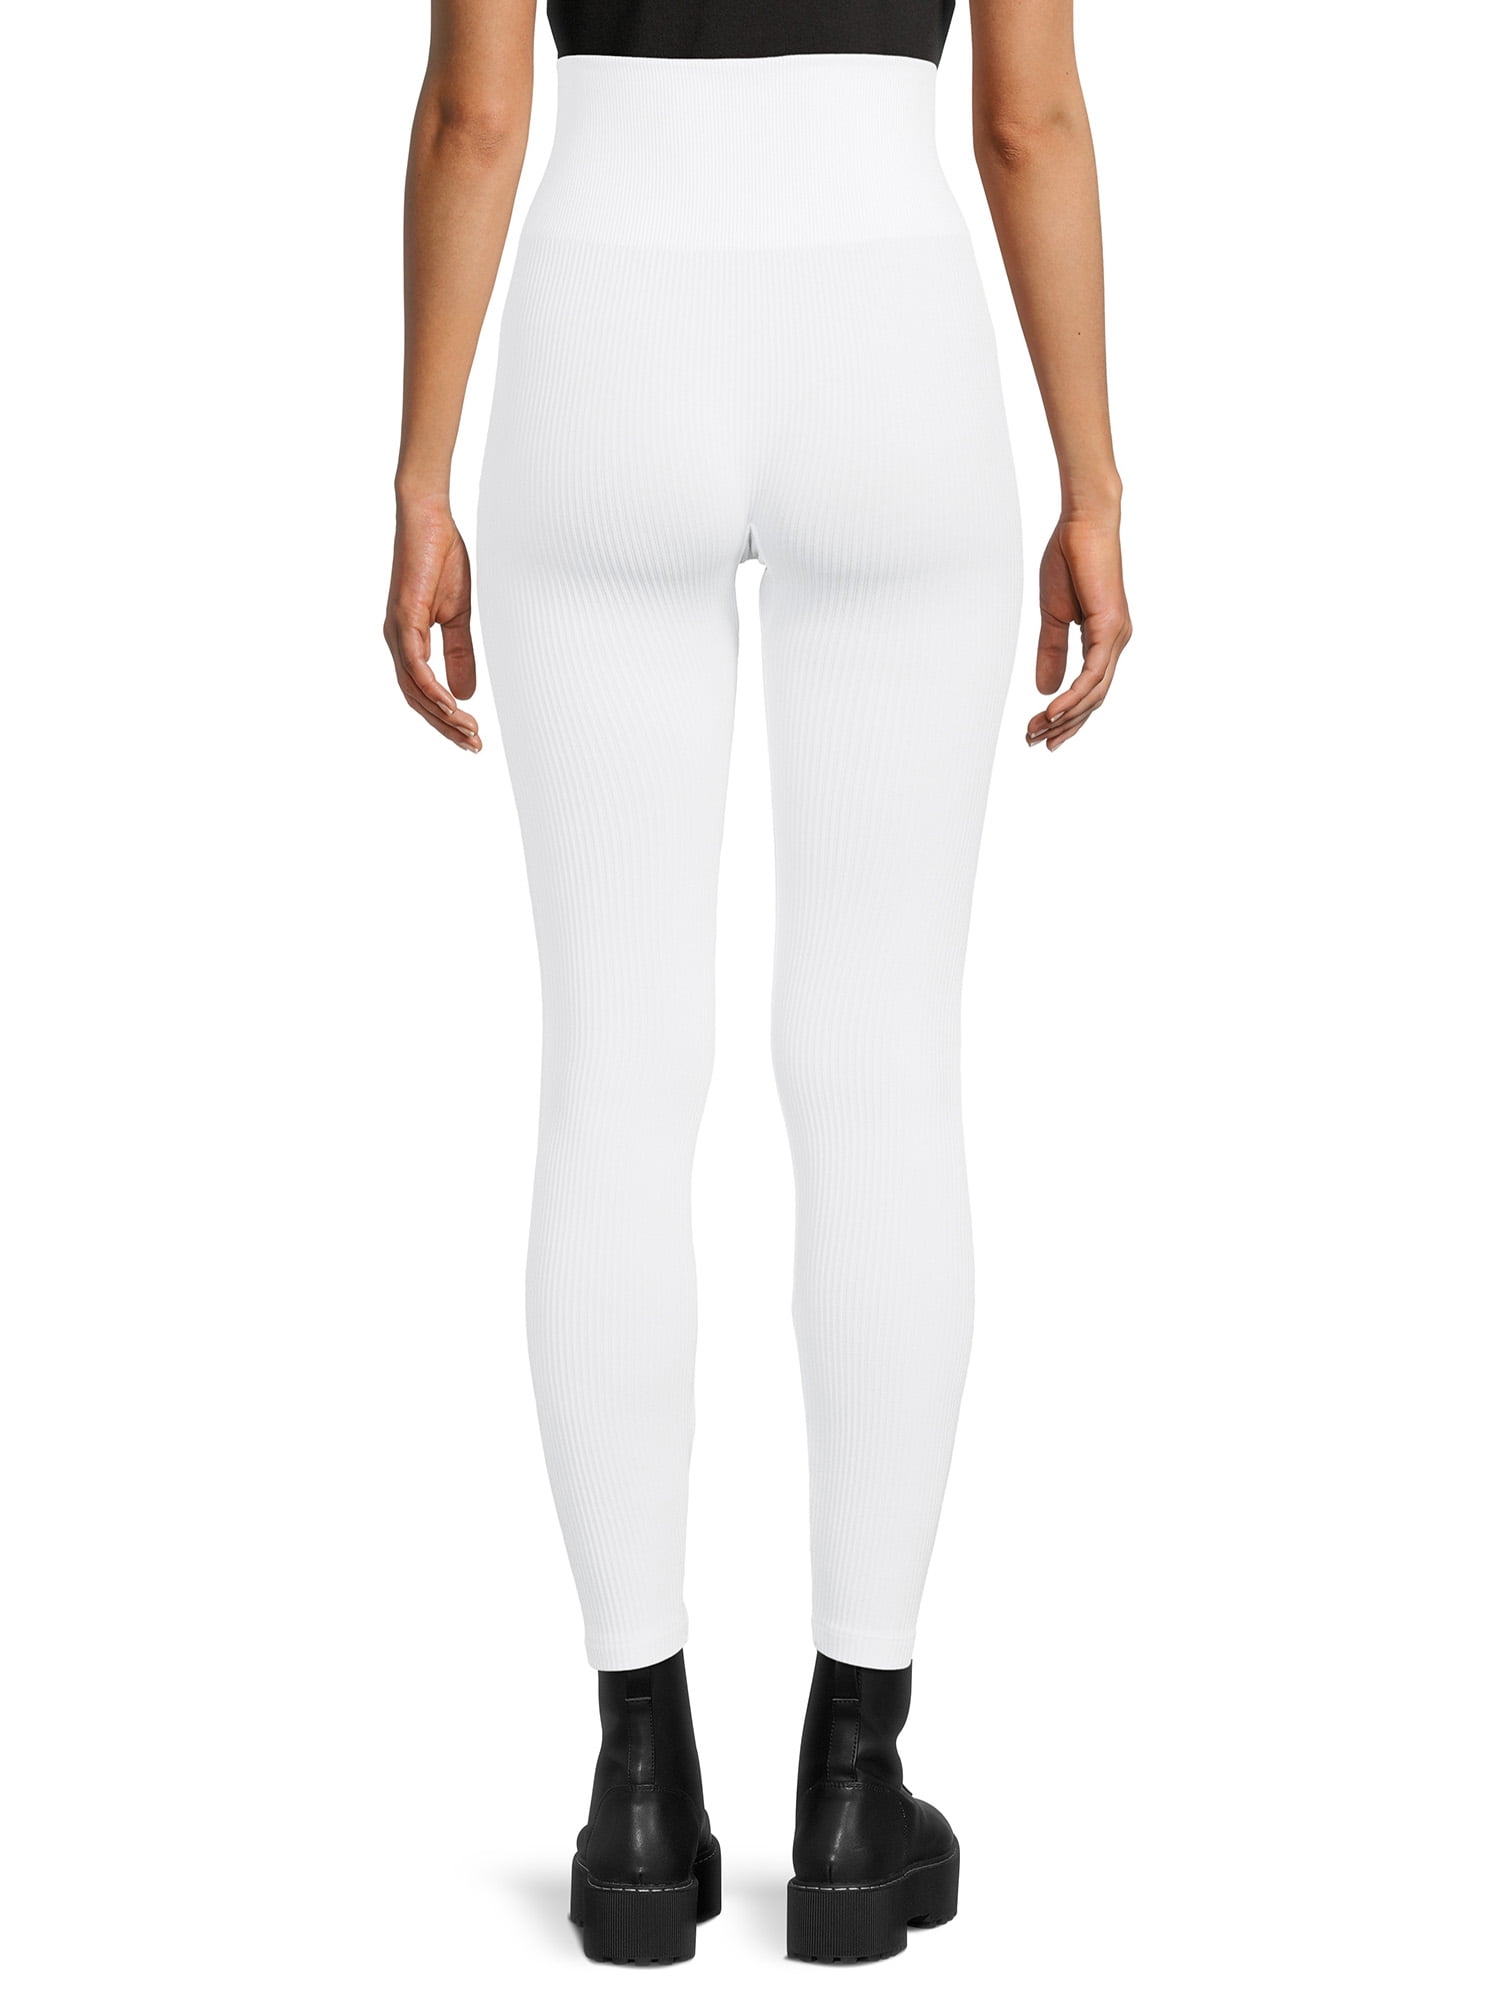 White Structured Snatched Rib Leggings